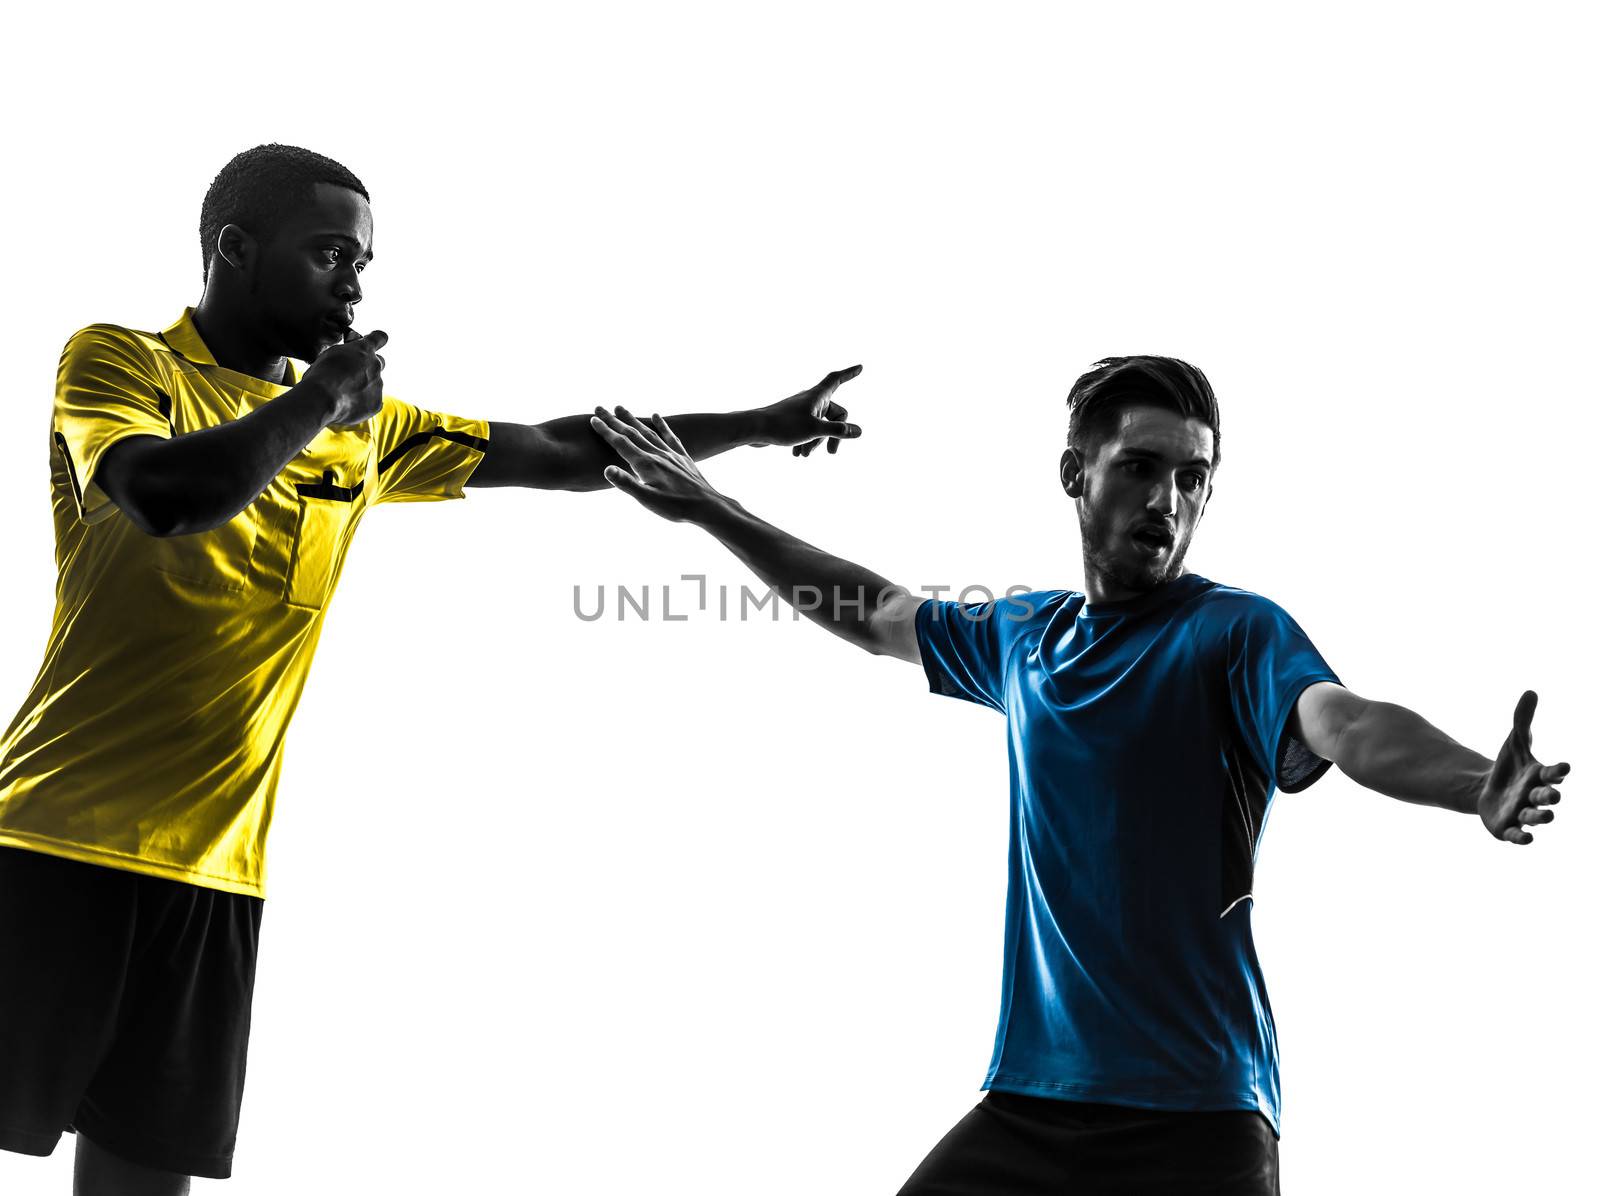 two men soccer player and referee in silhouette on white background